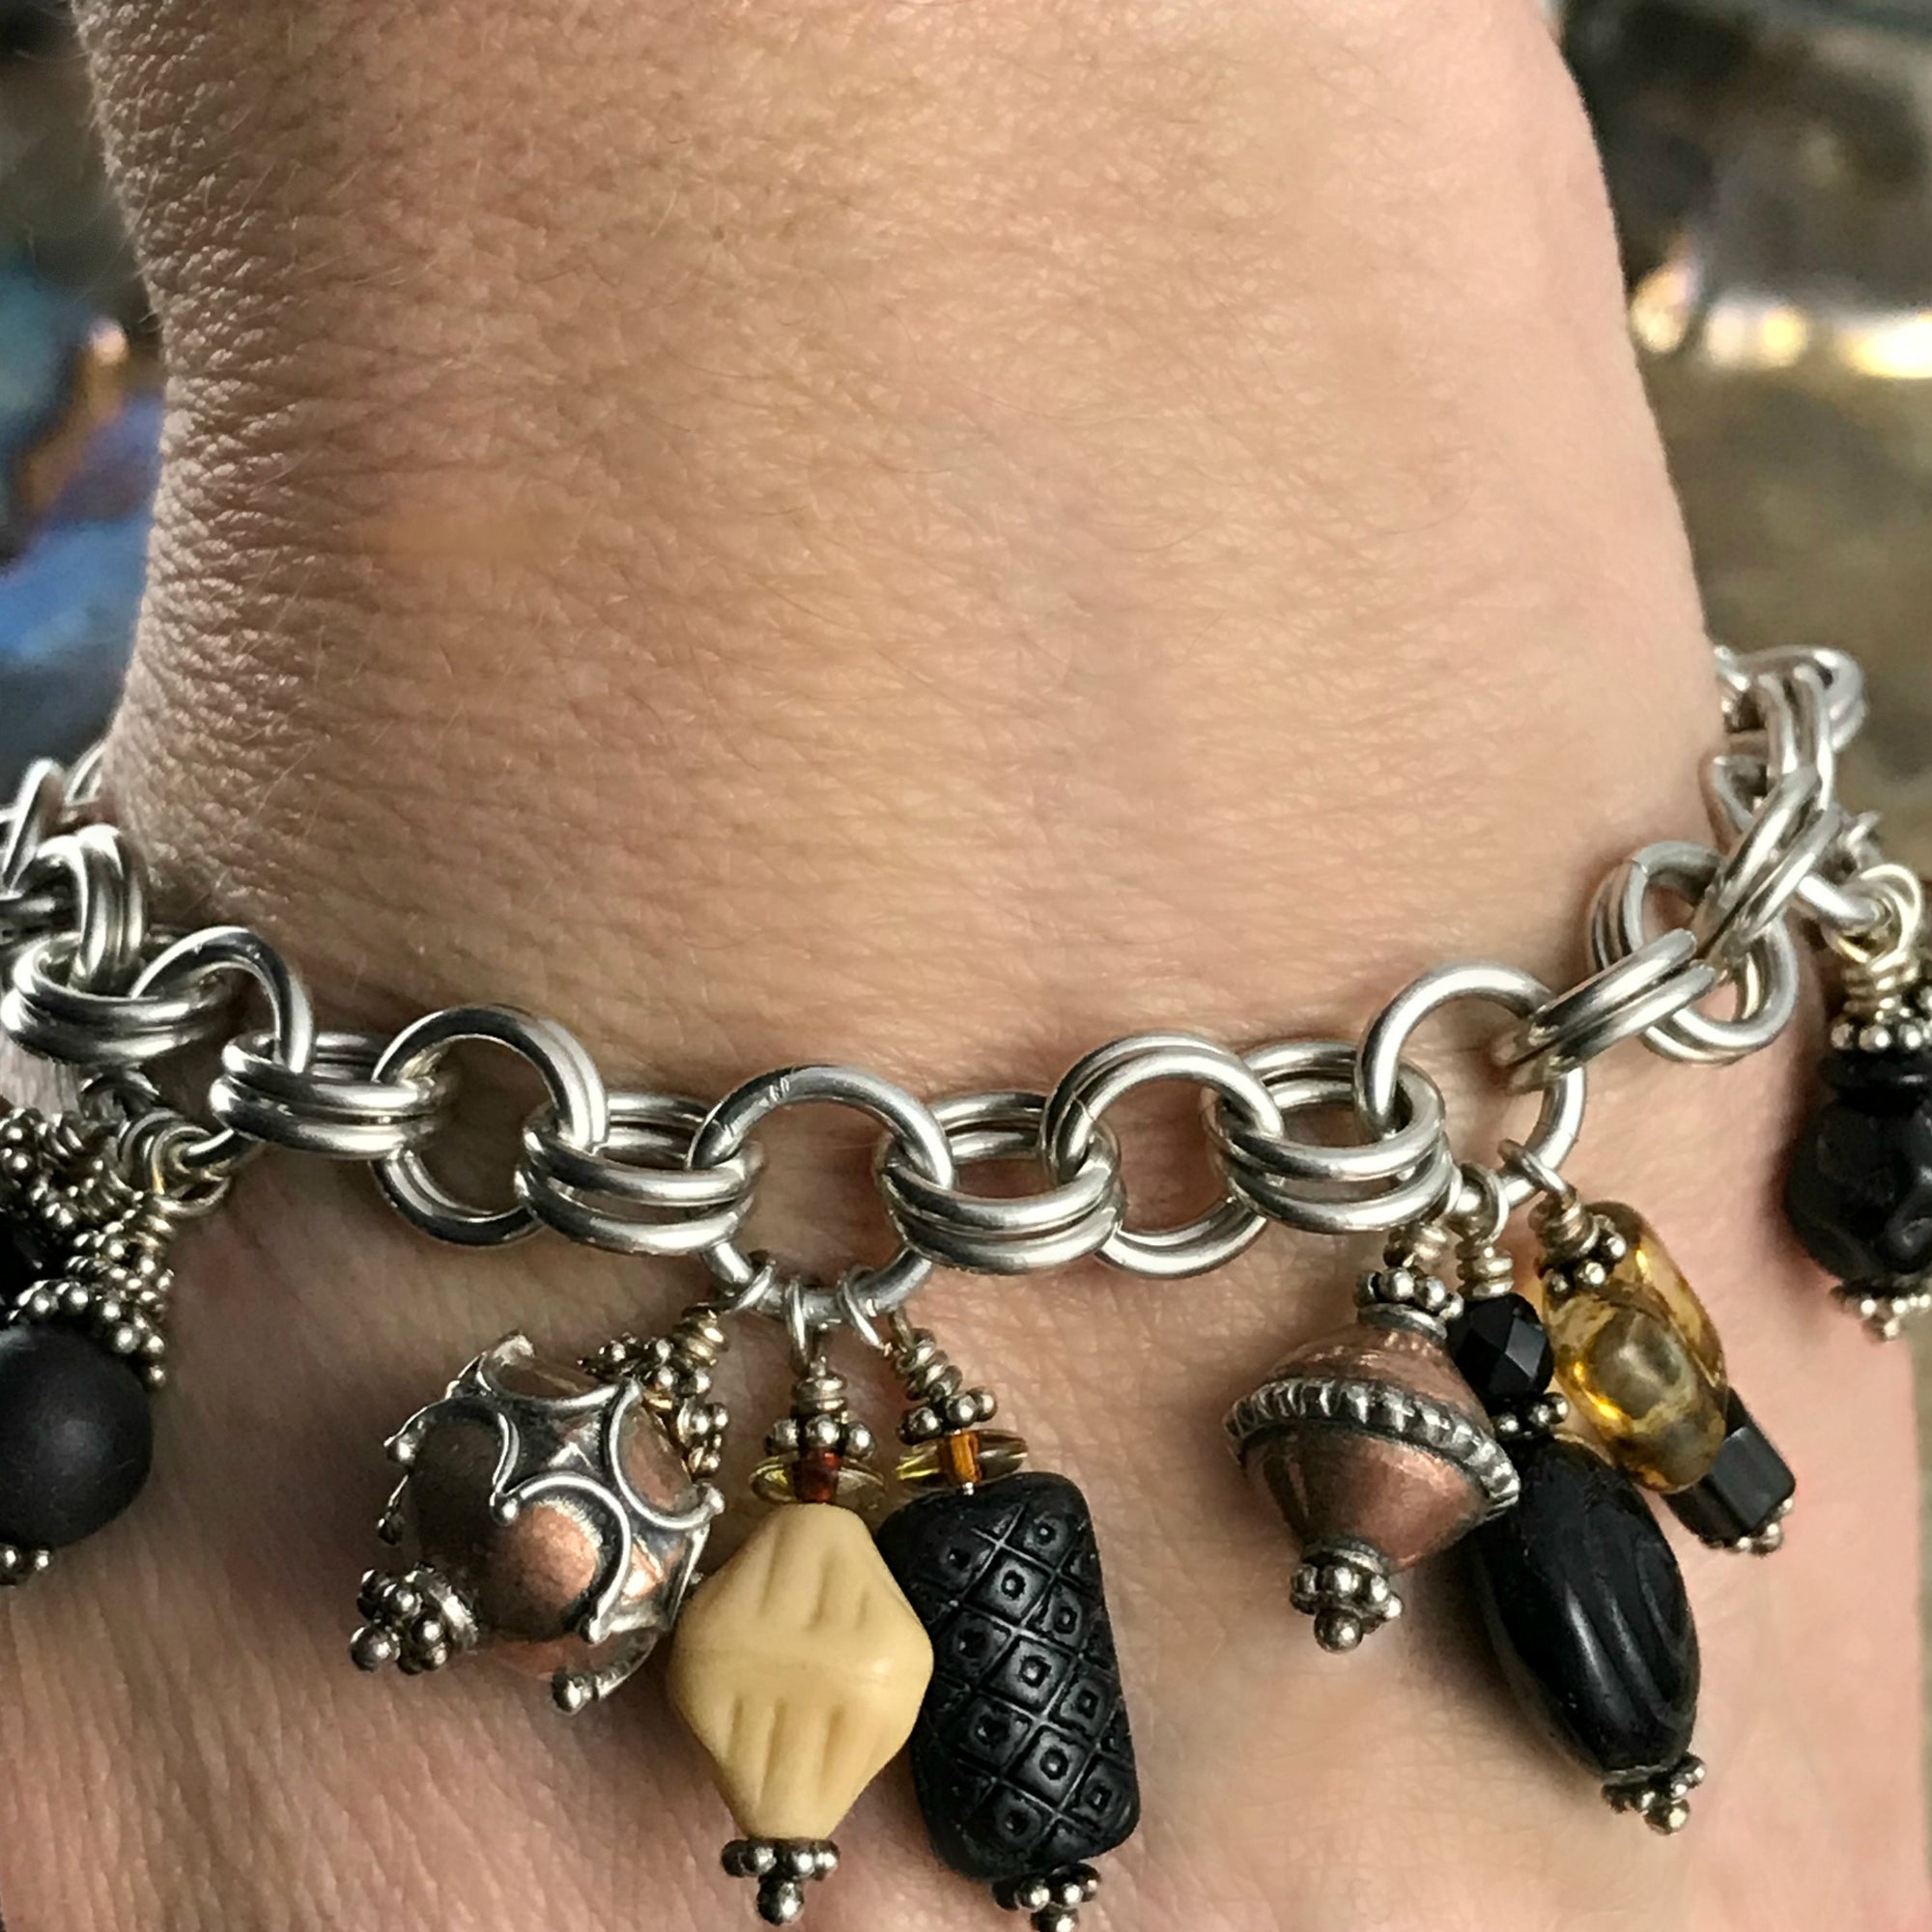 Available at Suzie Q Studio -- Czech glass, copper, sterling bead charm bracelet. The neutral colored bead-charms featured on this handcrafted sterling silver charm bracelet will go with a wide variety of styles and colors of outfits in your wardrobe. 